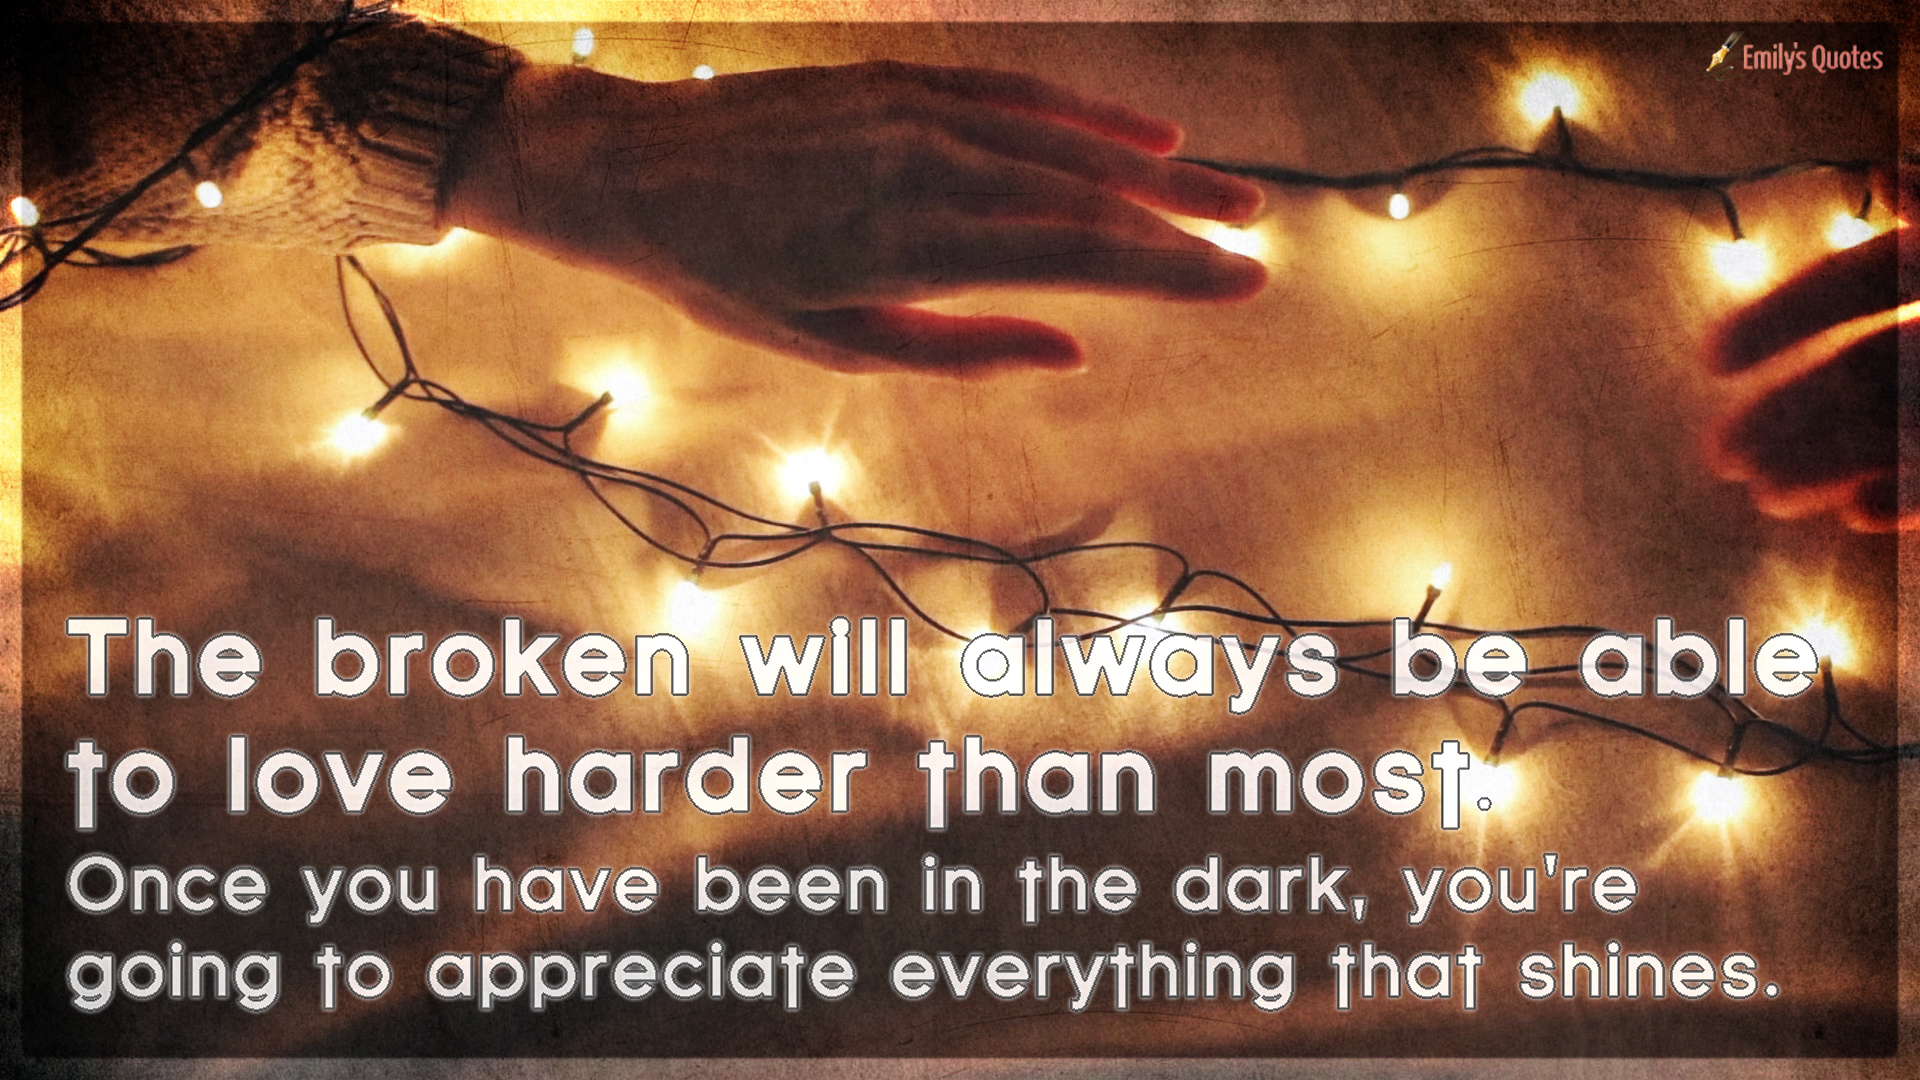 The broken will always be able to love harder than most. Once you have been in the dark